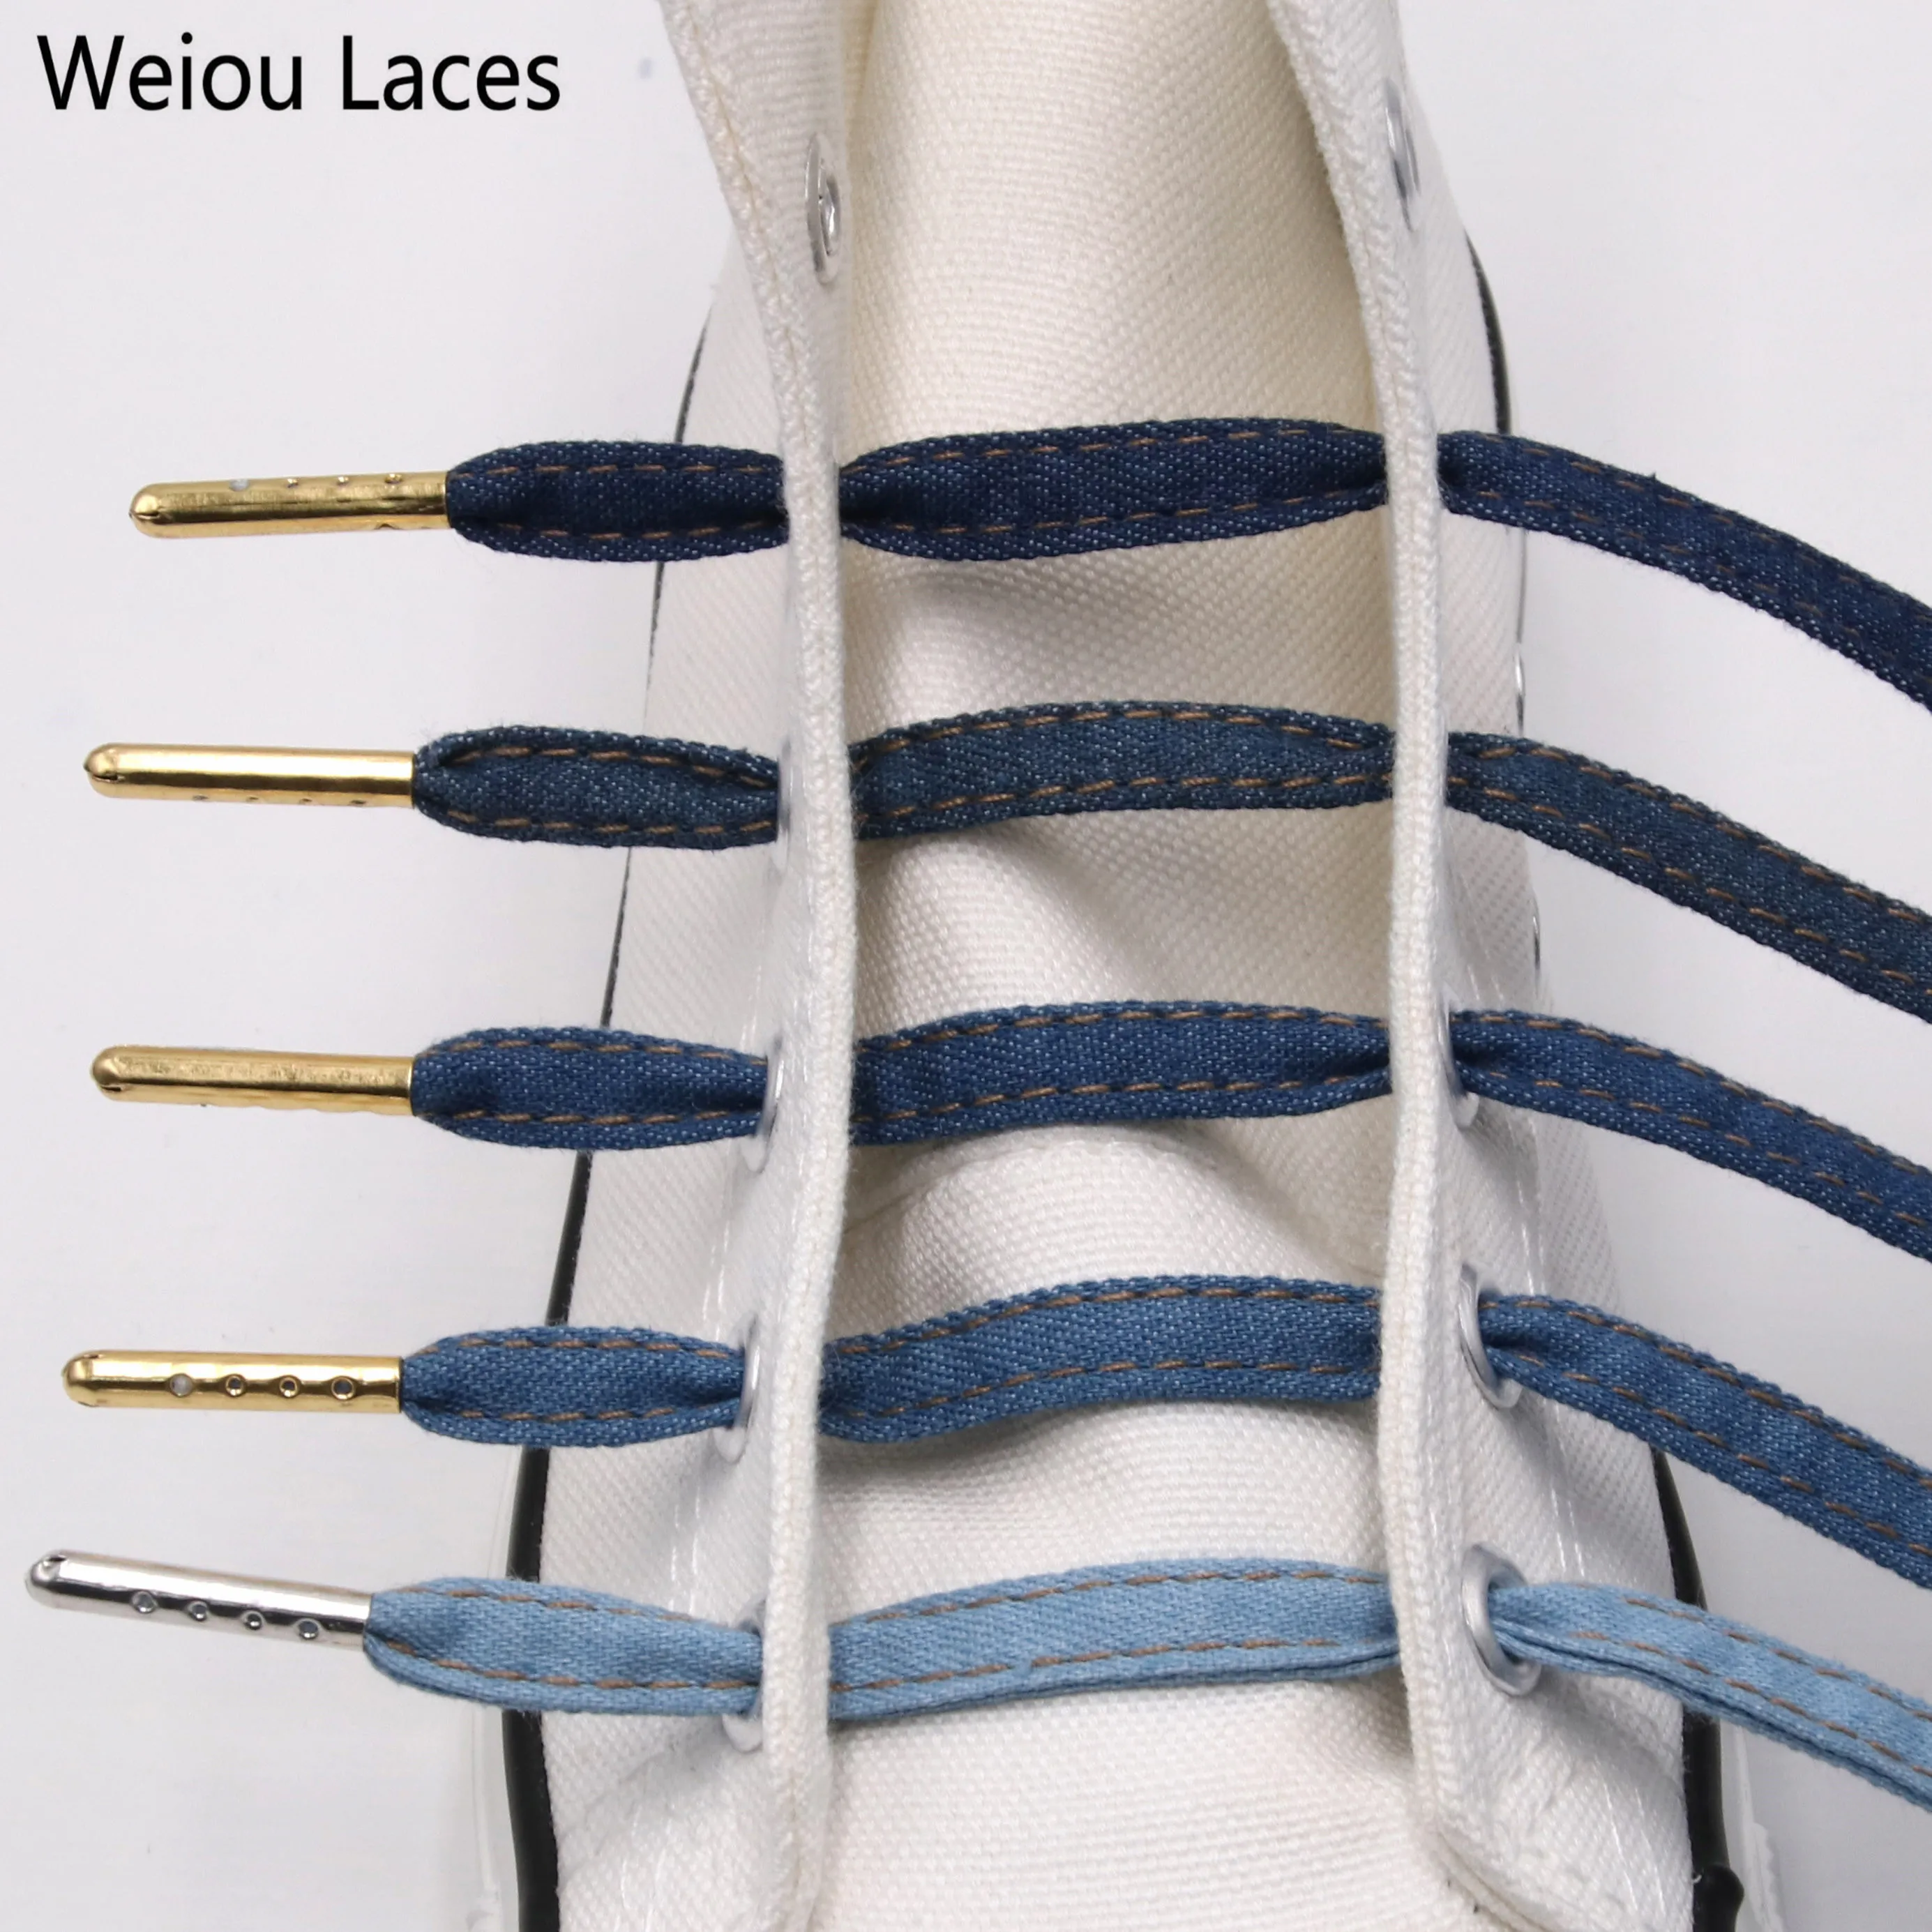 

Weiou laces Flat Denim Shoelaces With Metal Tips Cool Laces To Customize Your Kicks Blue Black Shoestrings For Sports Sneakers, Black blue ,support customized color printing